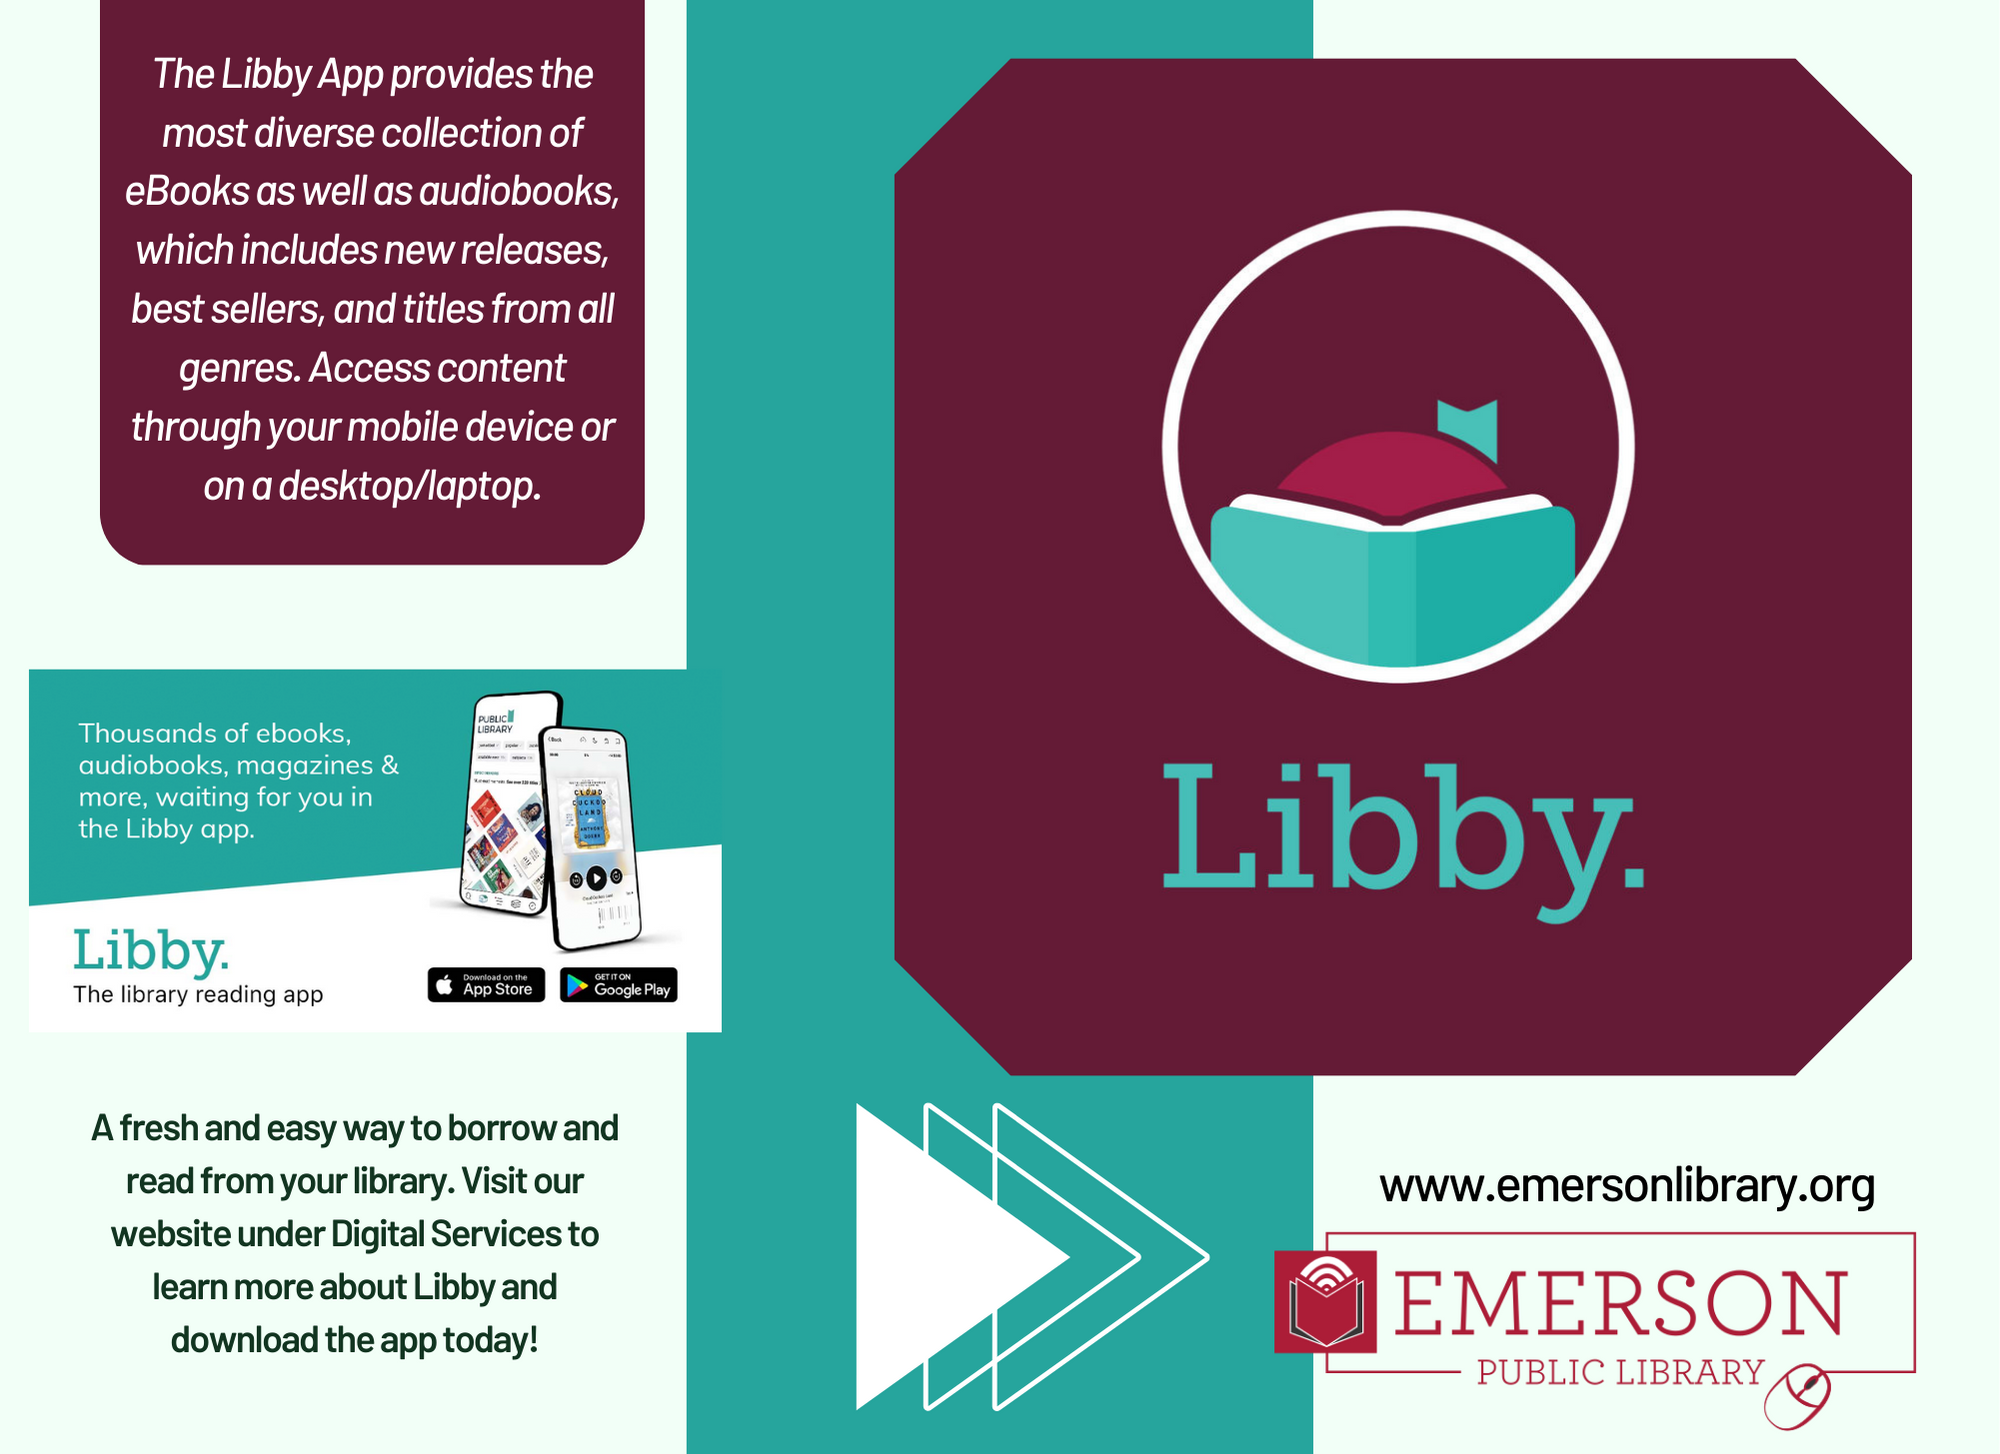 Libby, by OverDrive - eBook User Guide - Commerce Research Library